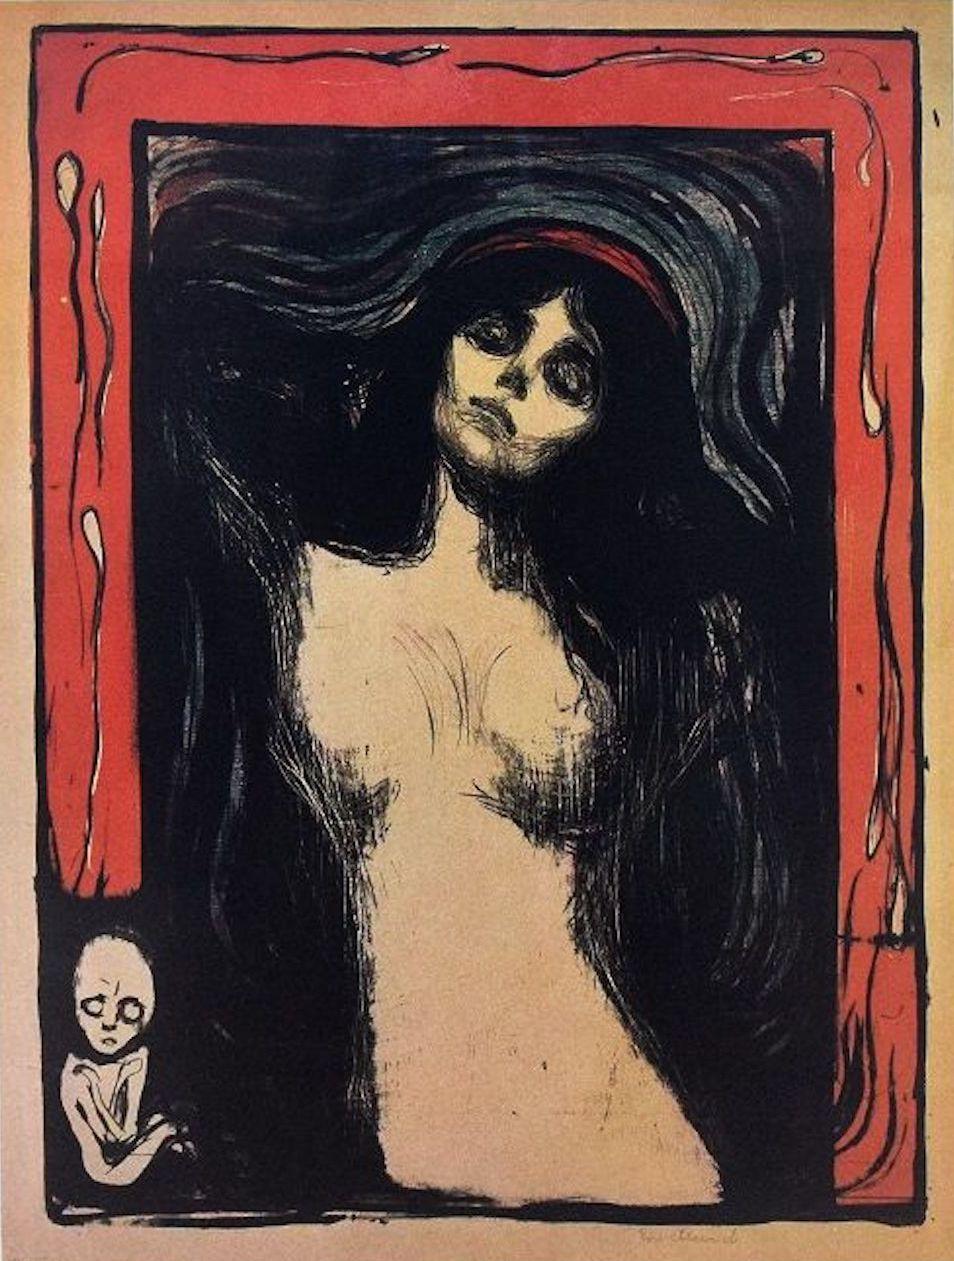 Unknown Figurative Print - Edvard Munch's Madonna - Lithograph on Paper After E. Munch - Early 1900